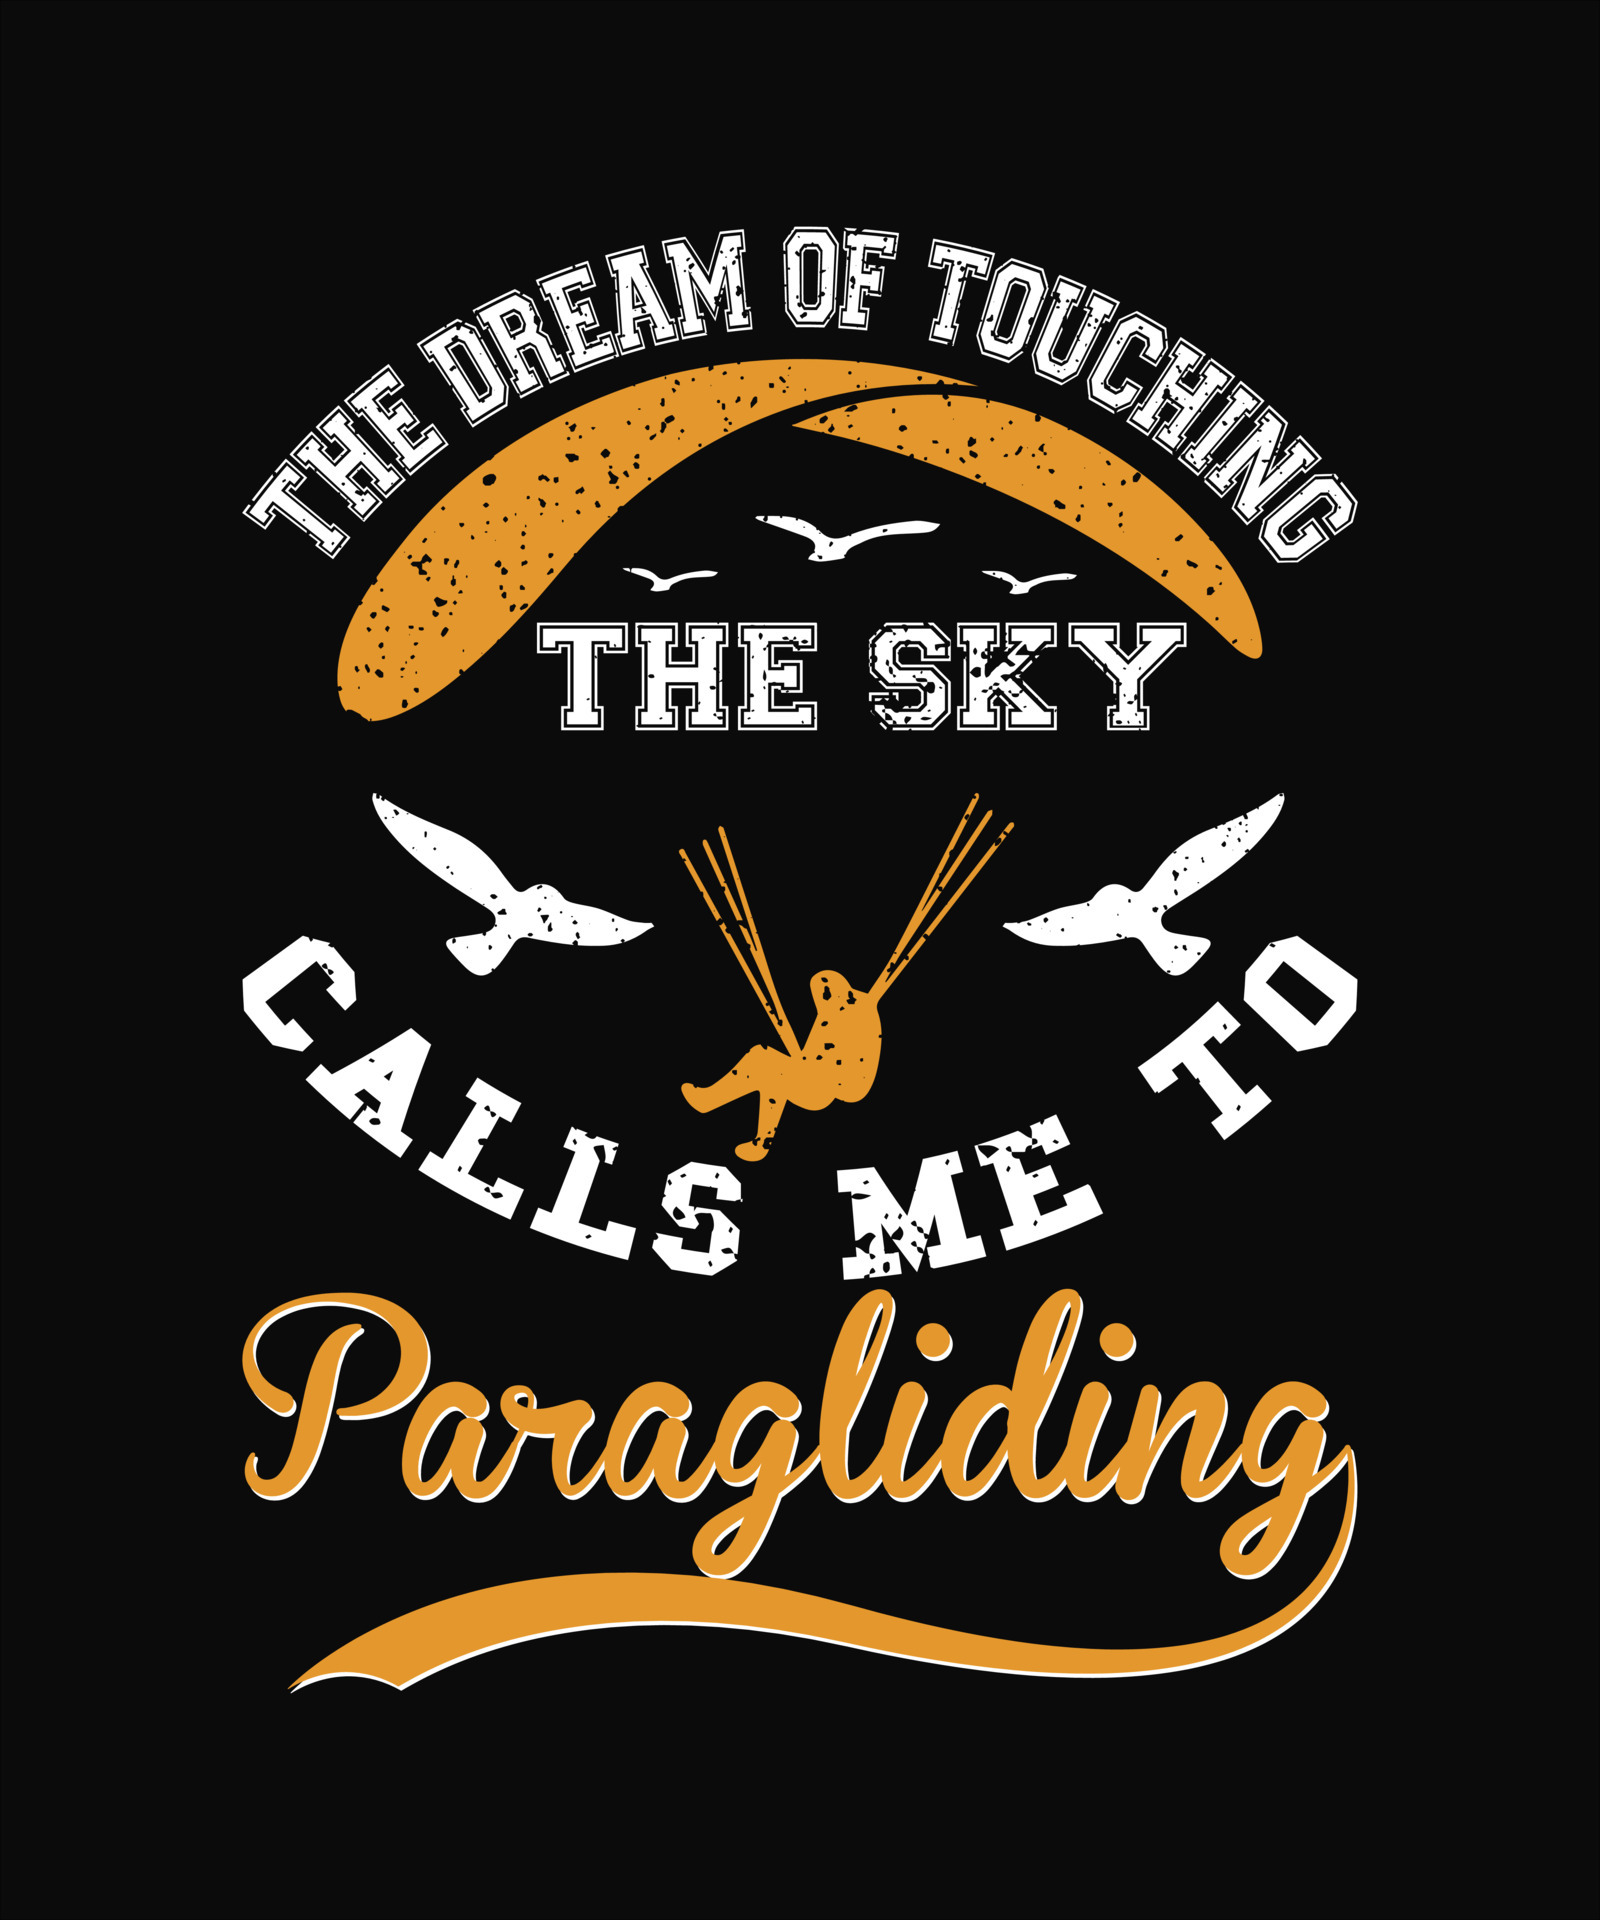 https://static.vecteezy.com/system/resources/previews/006/792/857/original/the-dream-of-touching-the-sky-calls-me-to-paragliding-t-shirt-design-free-free-vector.jpg